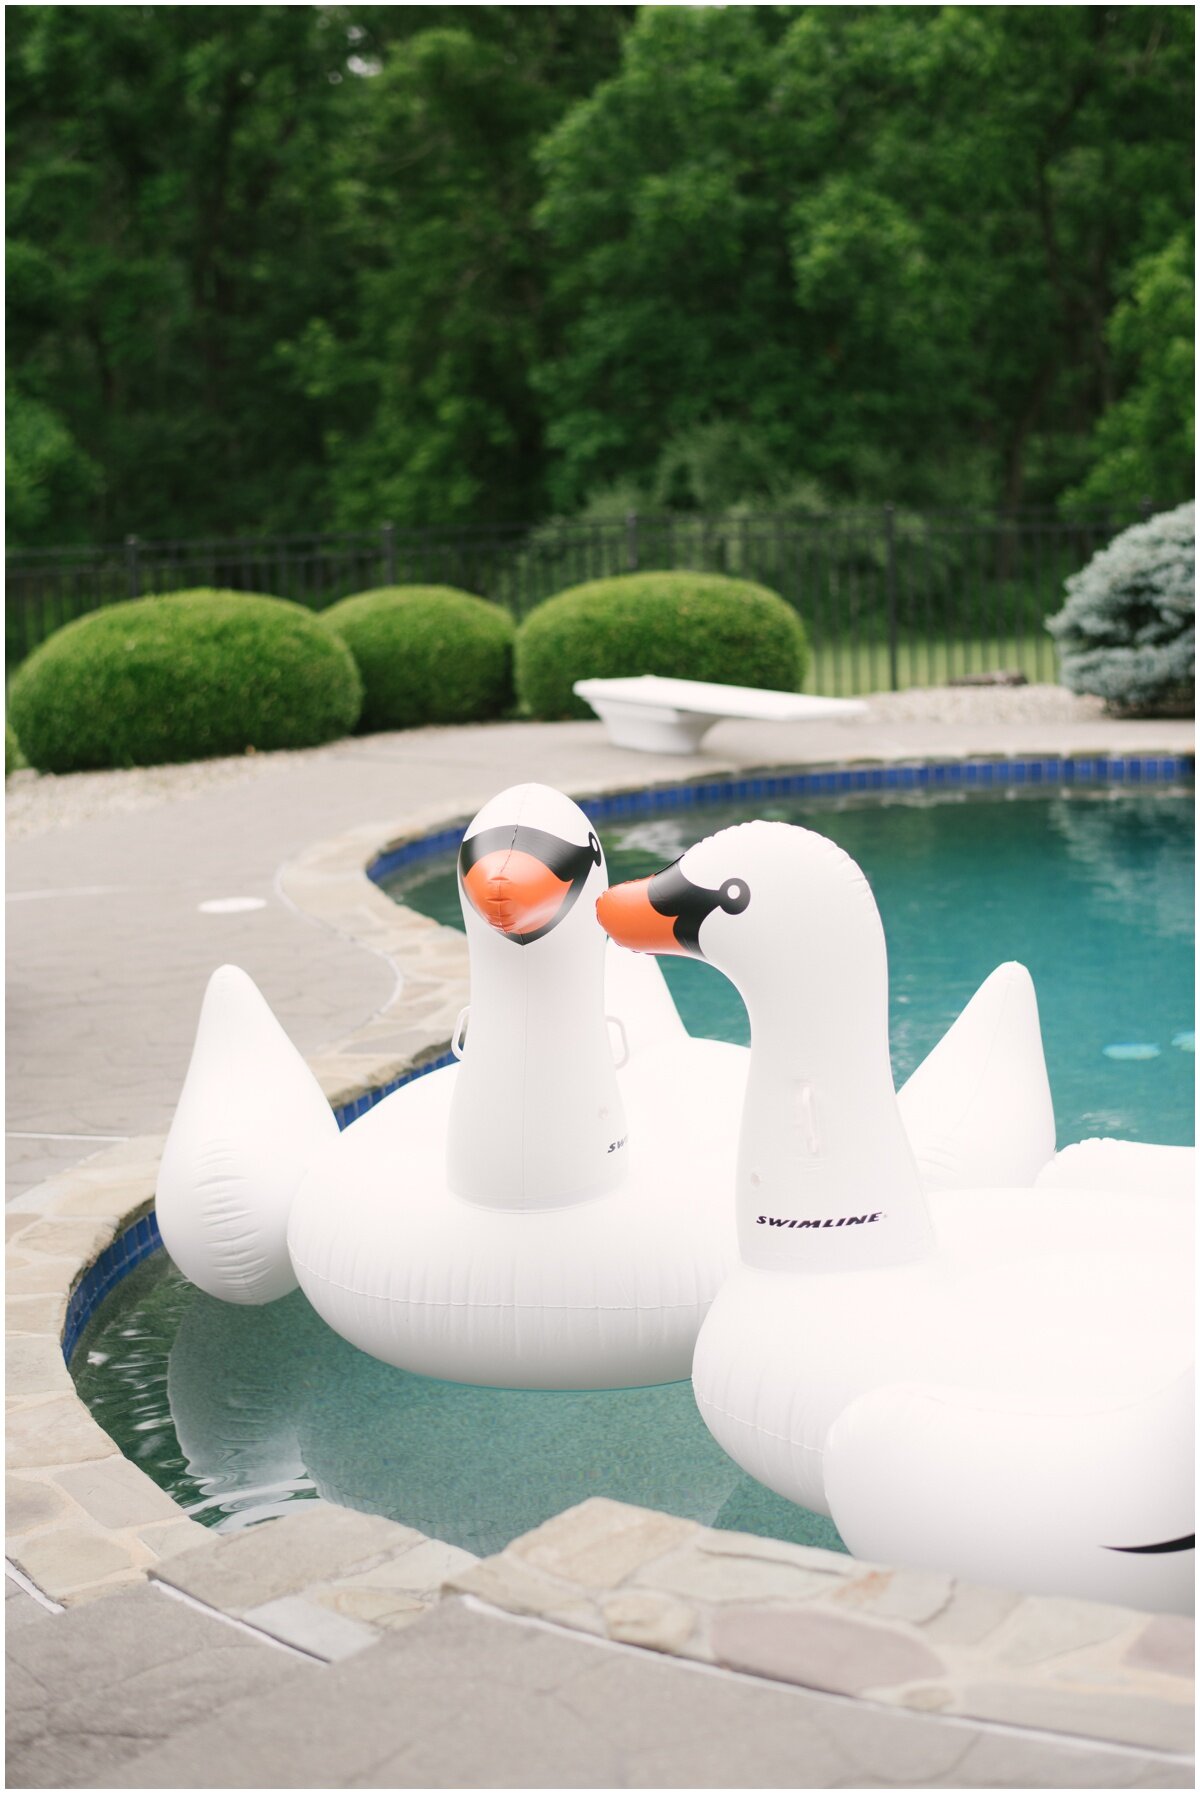  Blow-up swans in pool during private estate wedding 